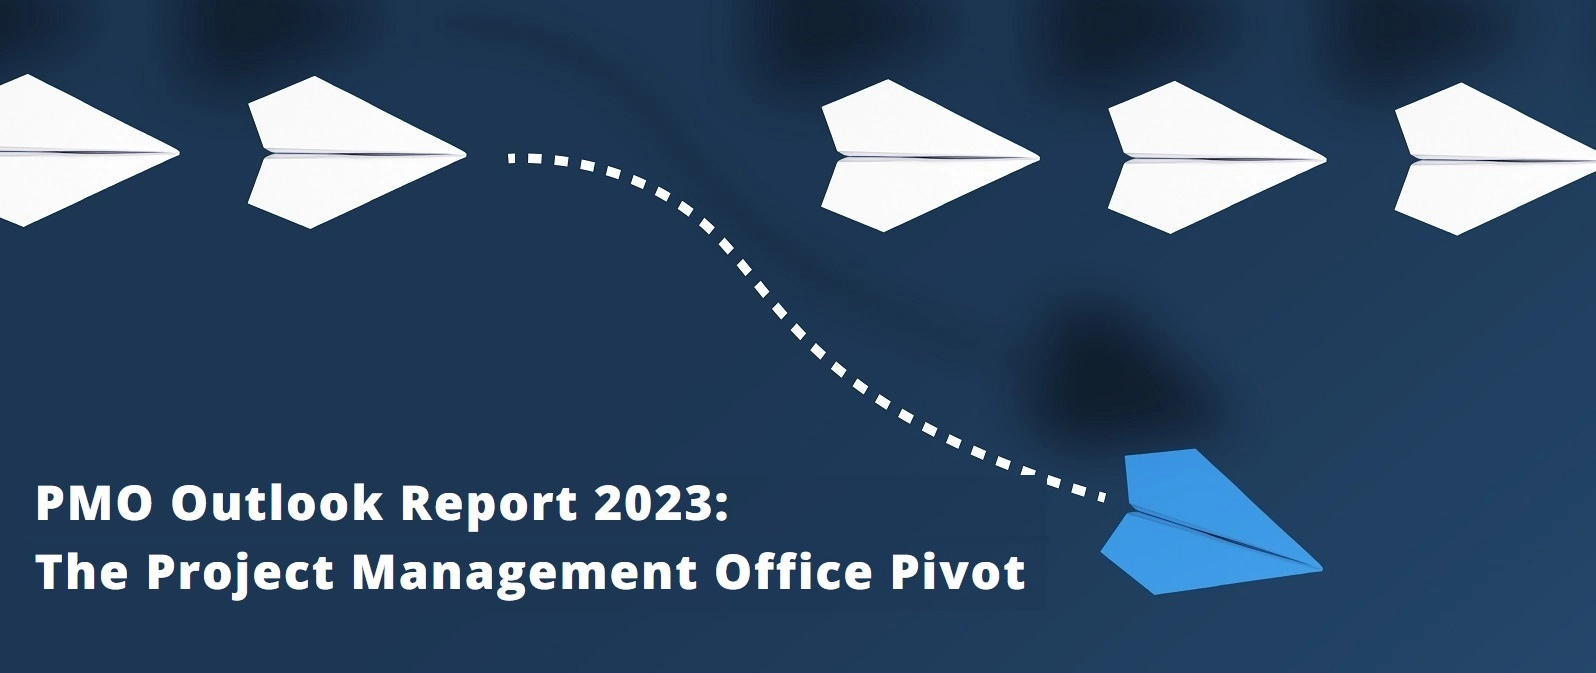 PMO Outlook Report 2023: The Project Management Office Pivot